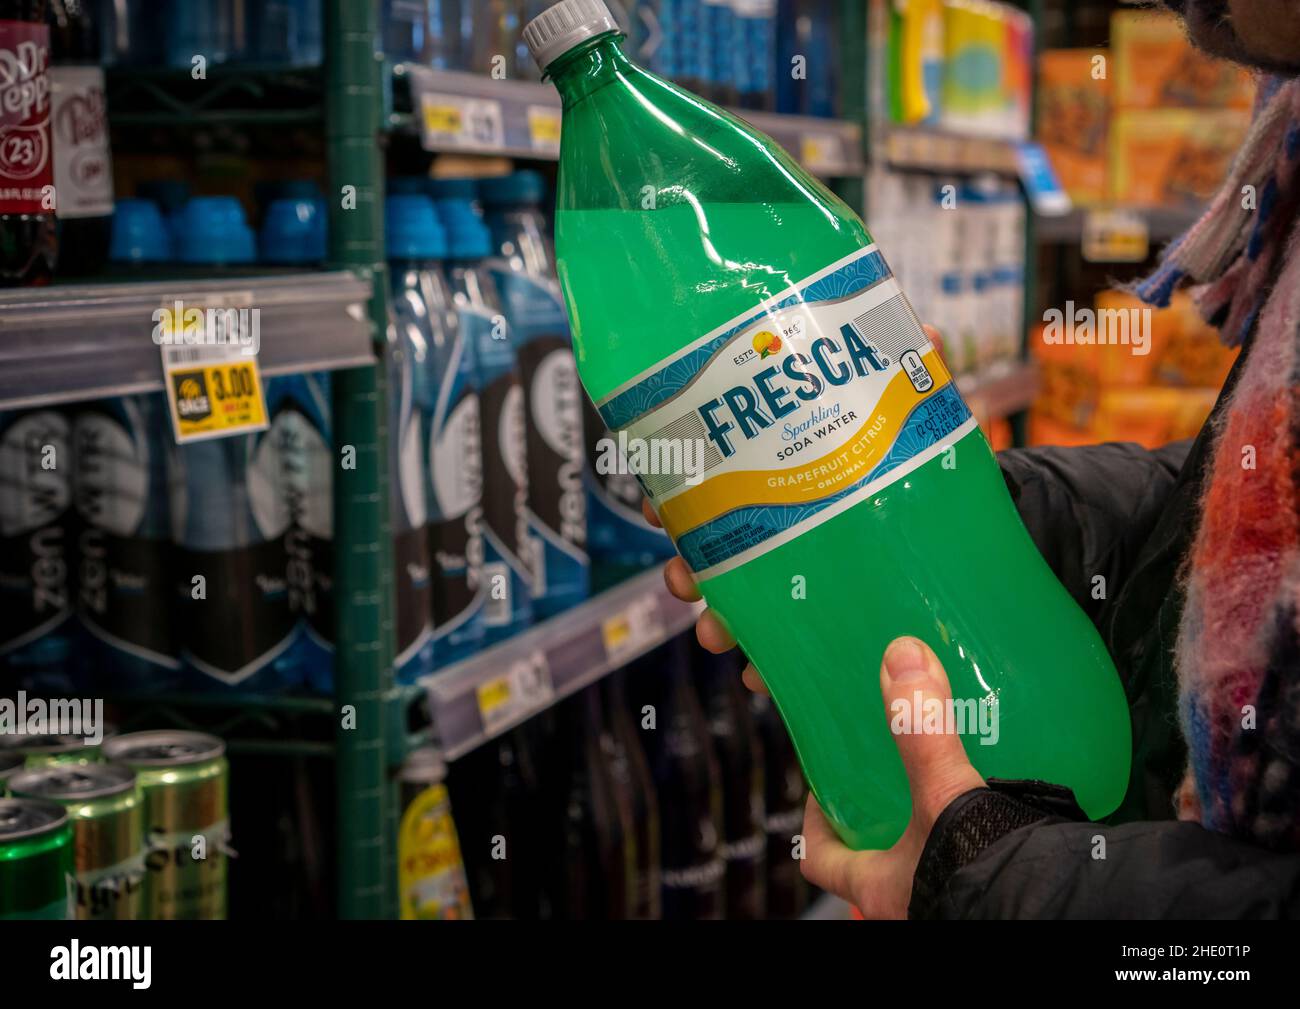 A discerning consumer chooses a bottle of Coca-Cola’s Fresca brand grapefruit-citrus flavored soda in a supermarket on Friday, January 7, 2022. The Coca-Cola Co. announced a partnership with Constellation Brands to create a Fresca alcoholic canned cocktail, entitled Fresca Mixed. (© Richard B. Levine) Stock Photo